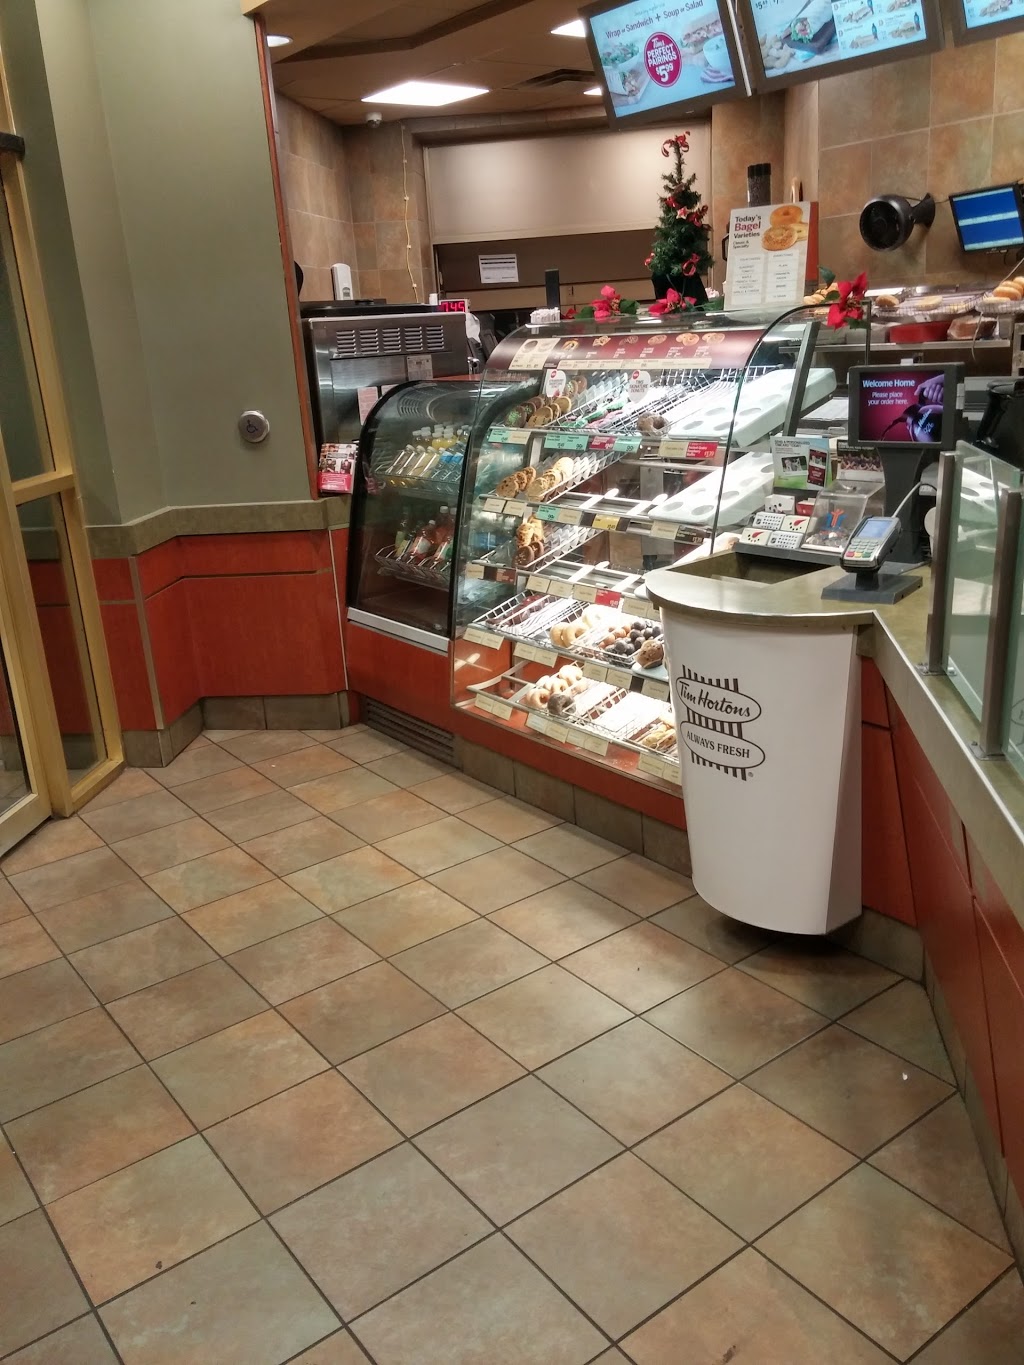 Tim Hortons | cafe | 111 York St, London, ON N6A 1A8, Canada | 5194386701 OR +1 519-438-6701